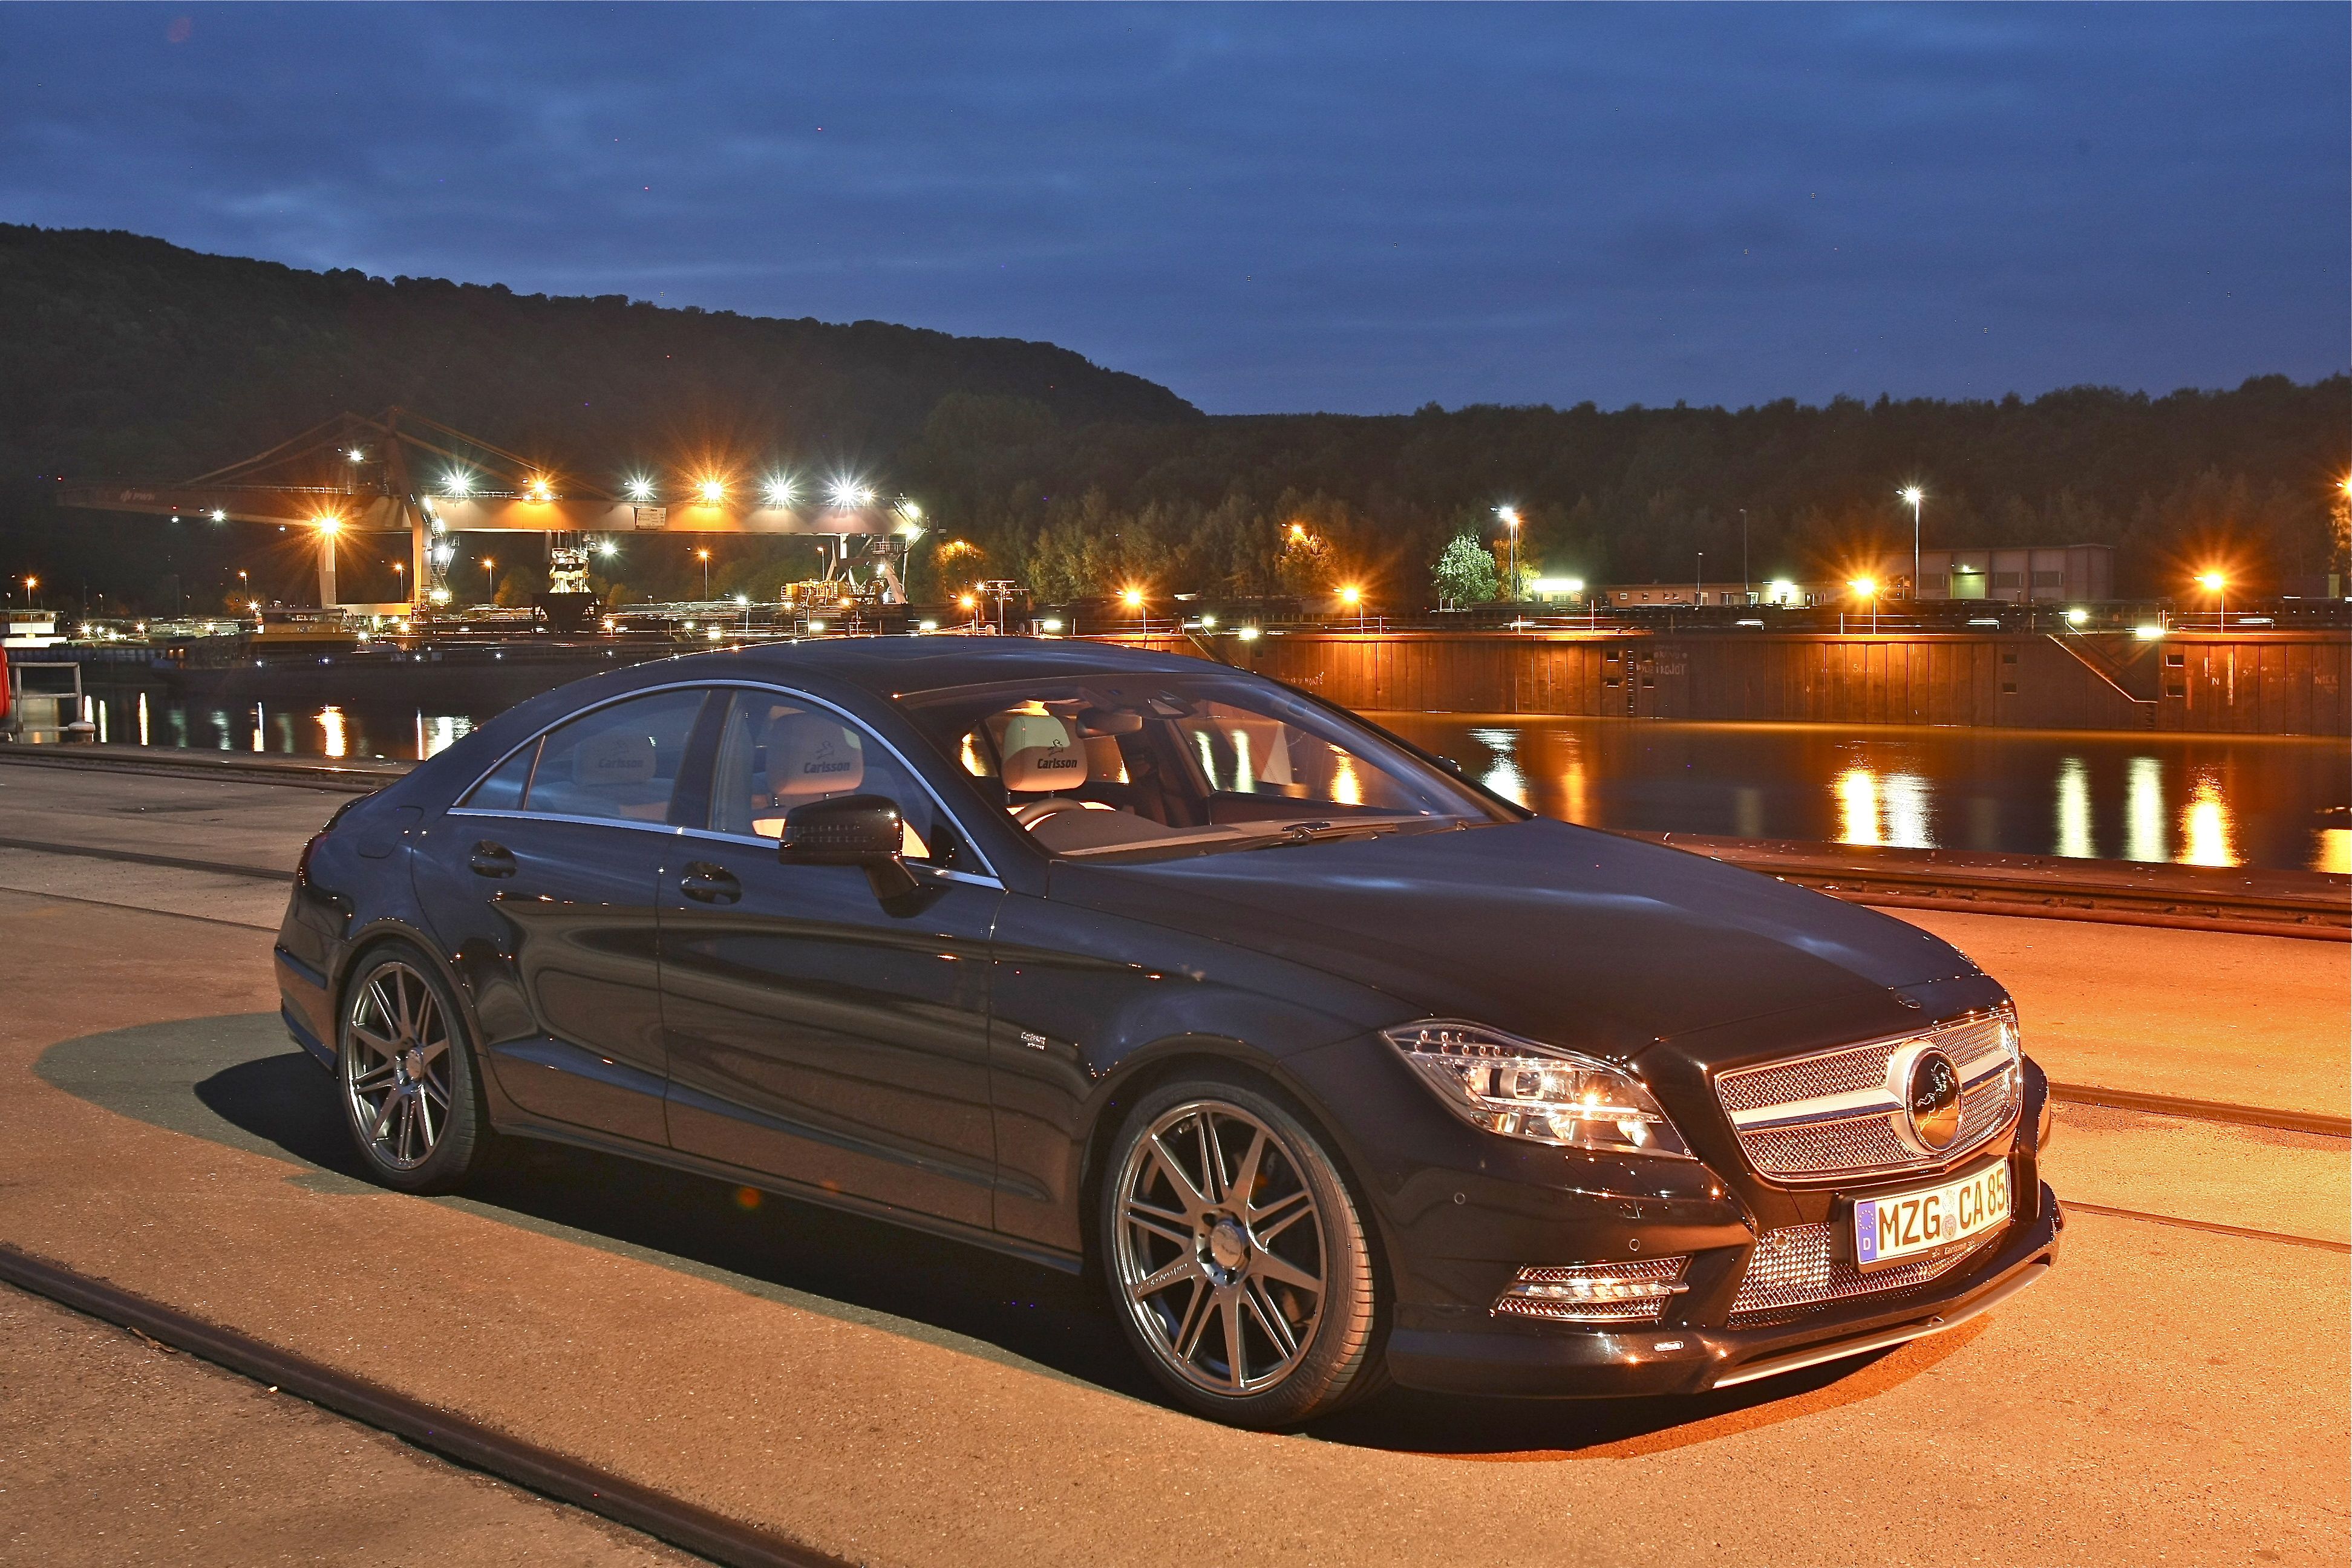 2012 Mercedes CLS-Class by Carlsson